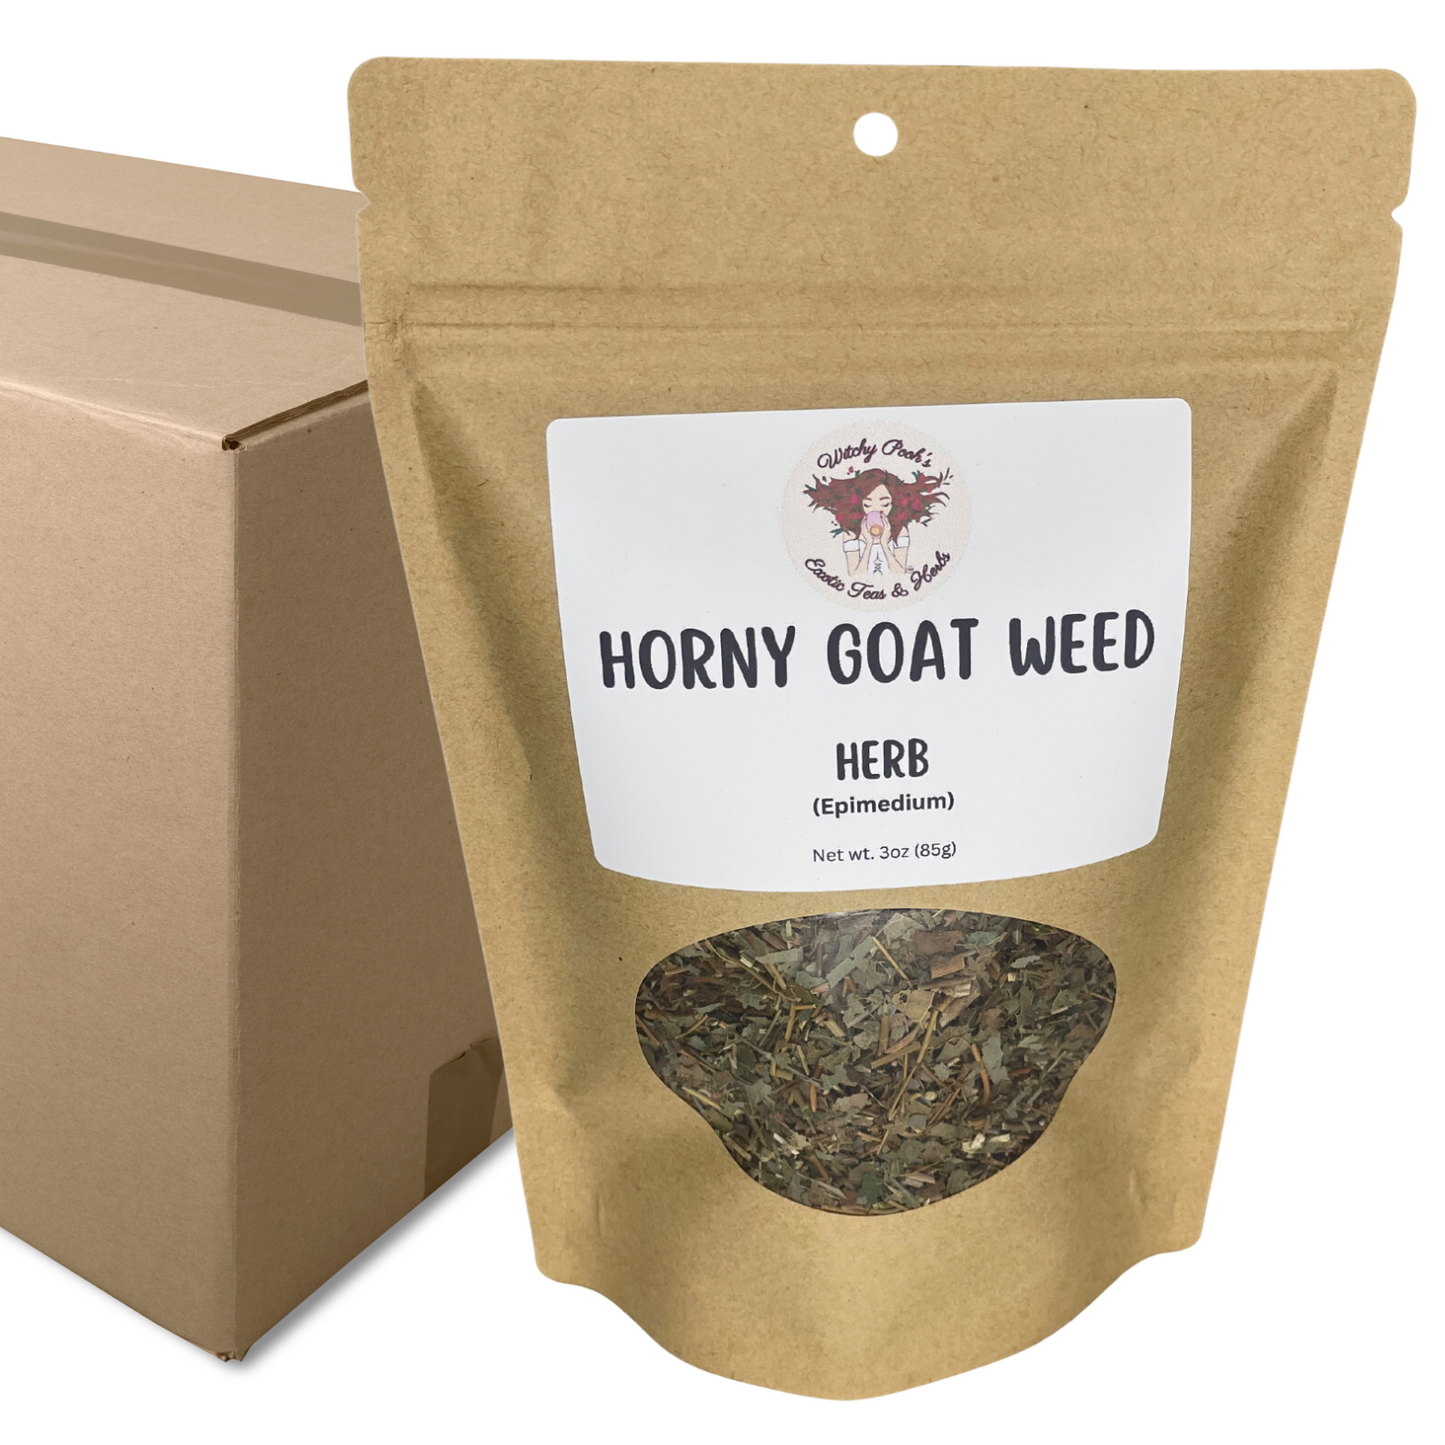 Witchy Pooh's Horny Goat Weed Herb For Increasing Sexual Desires